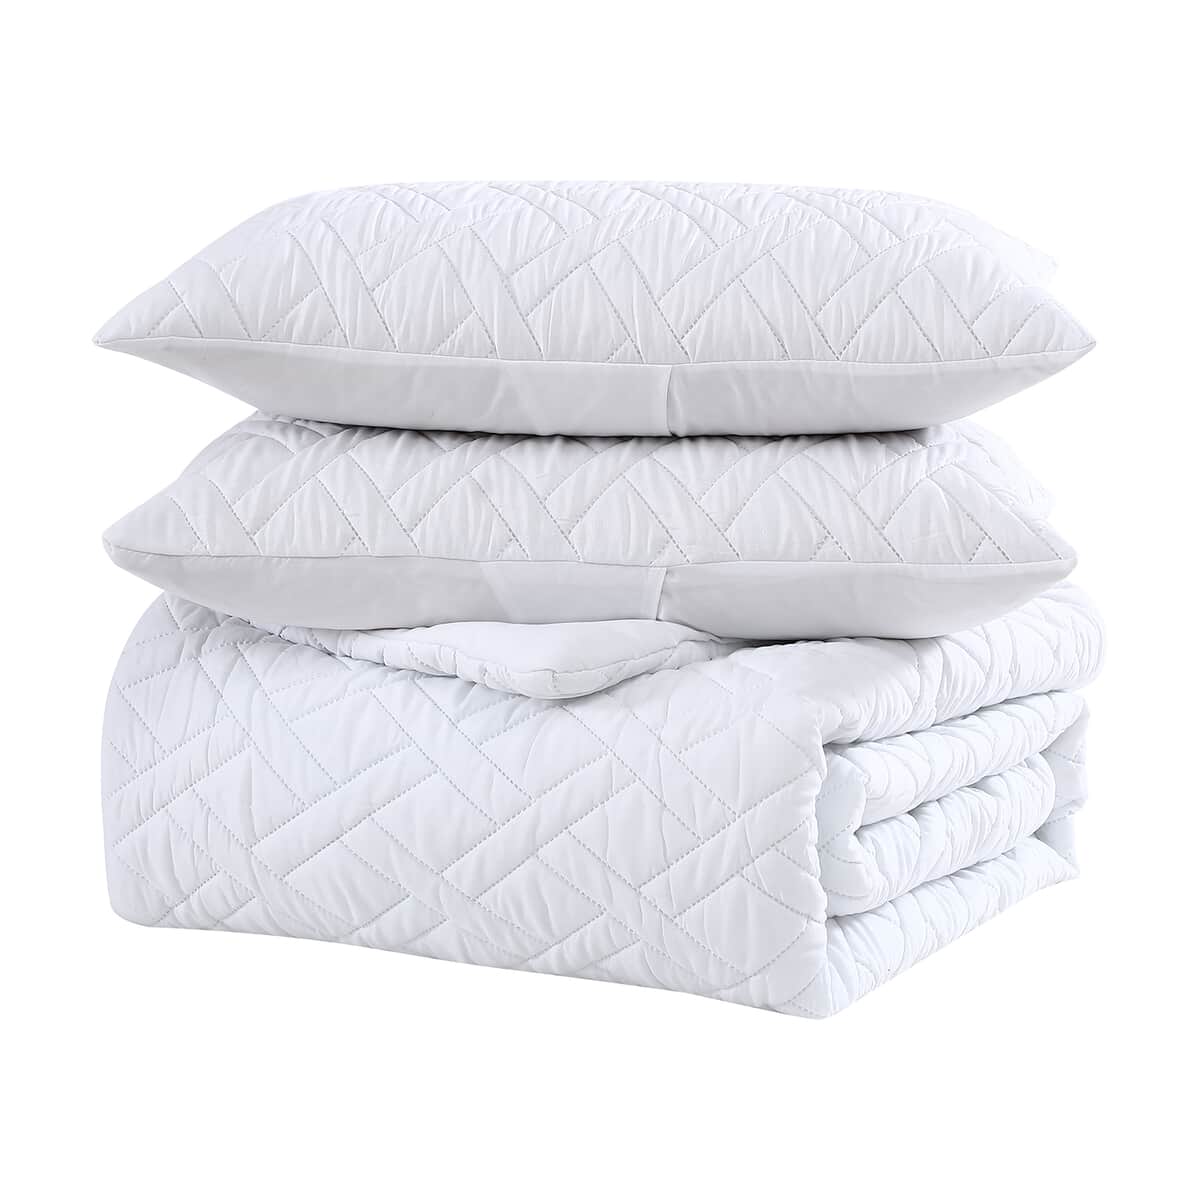 The Nesting Company- Larch 3 Piece Queen Comforter Set White image number 4